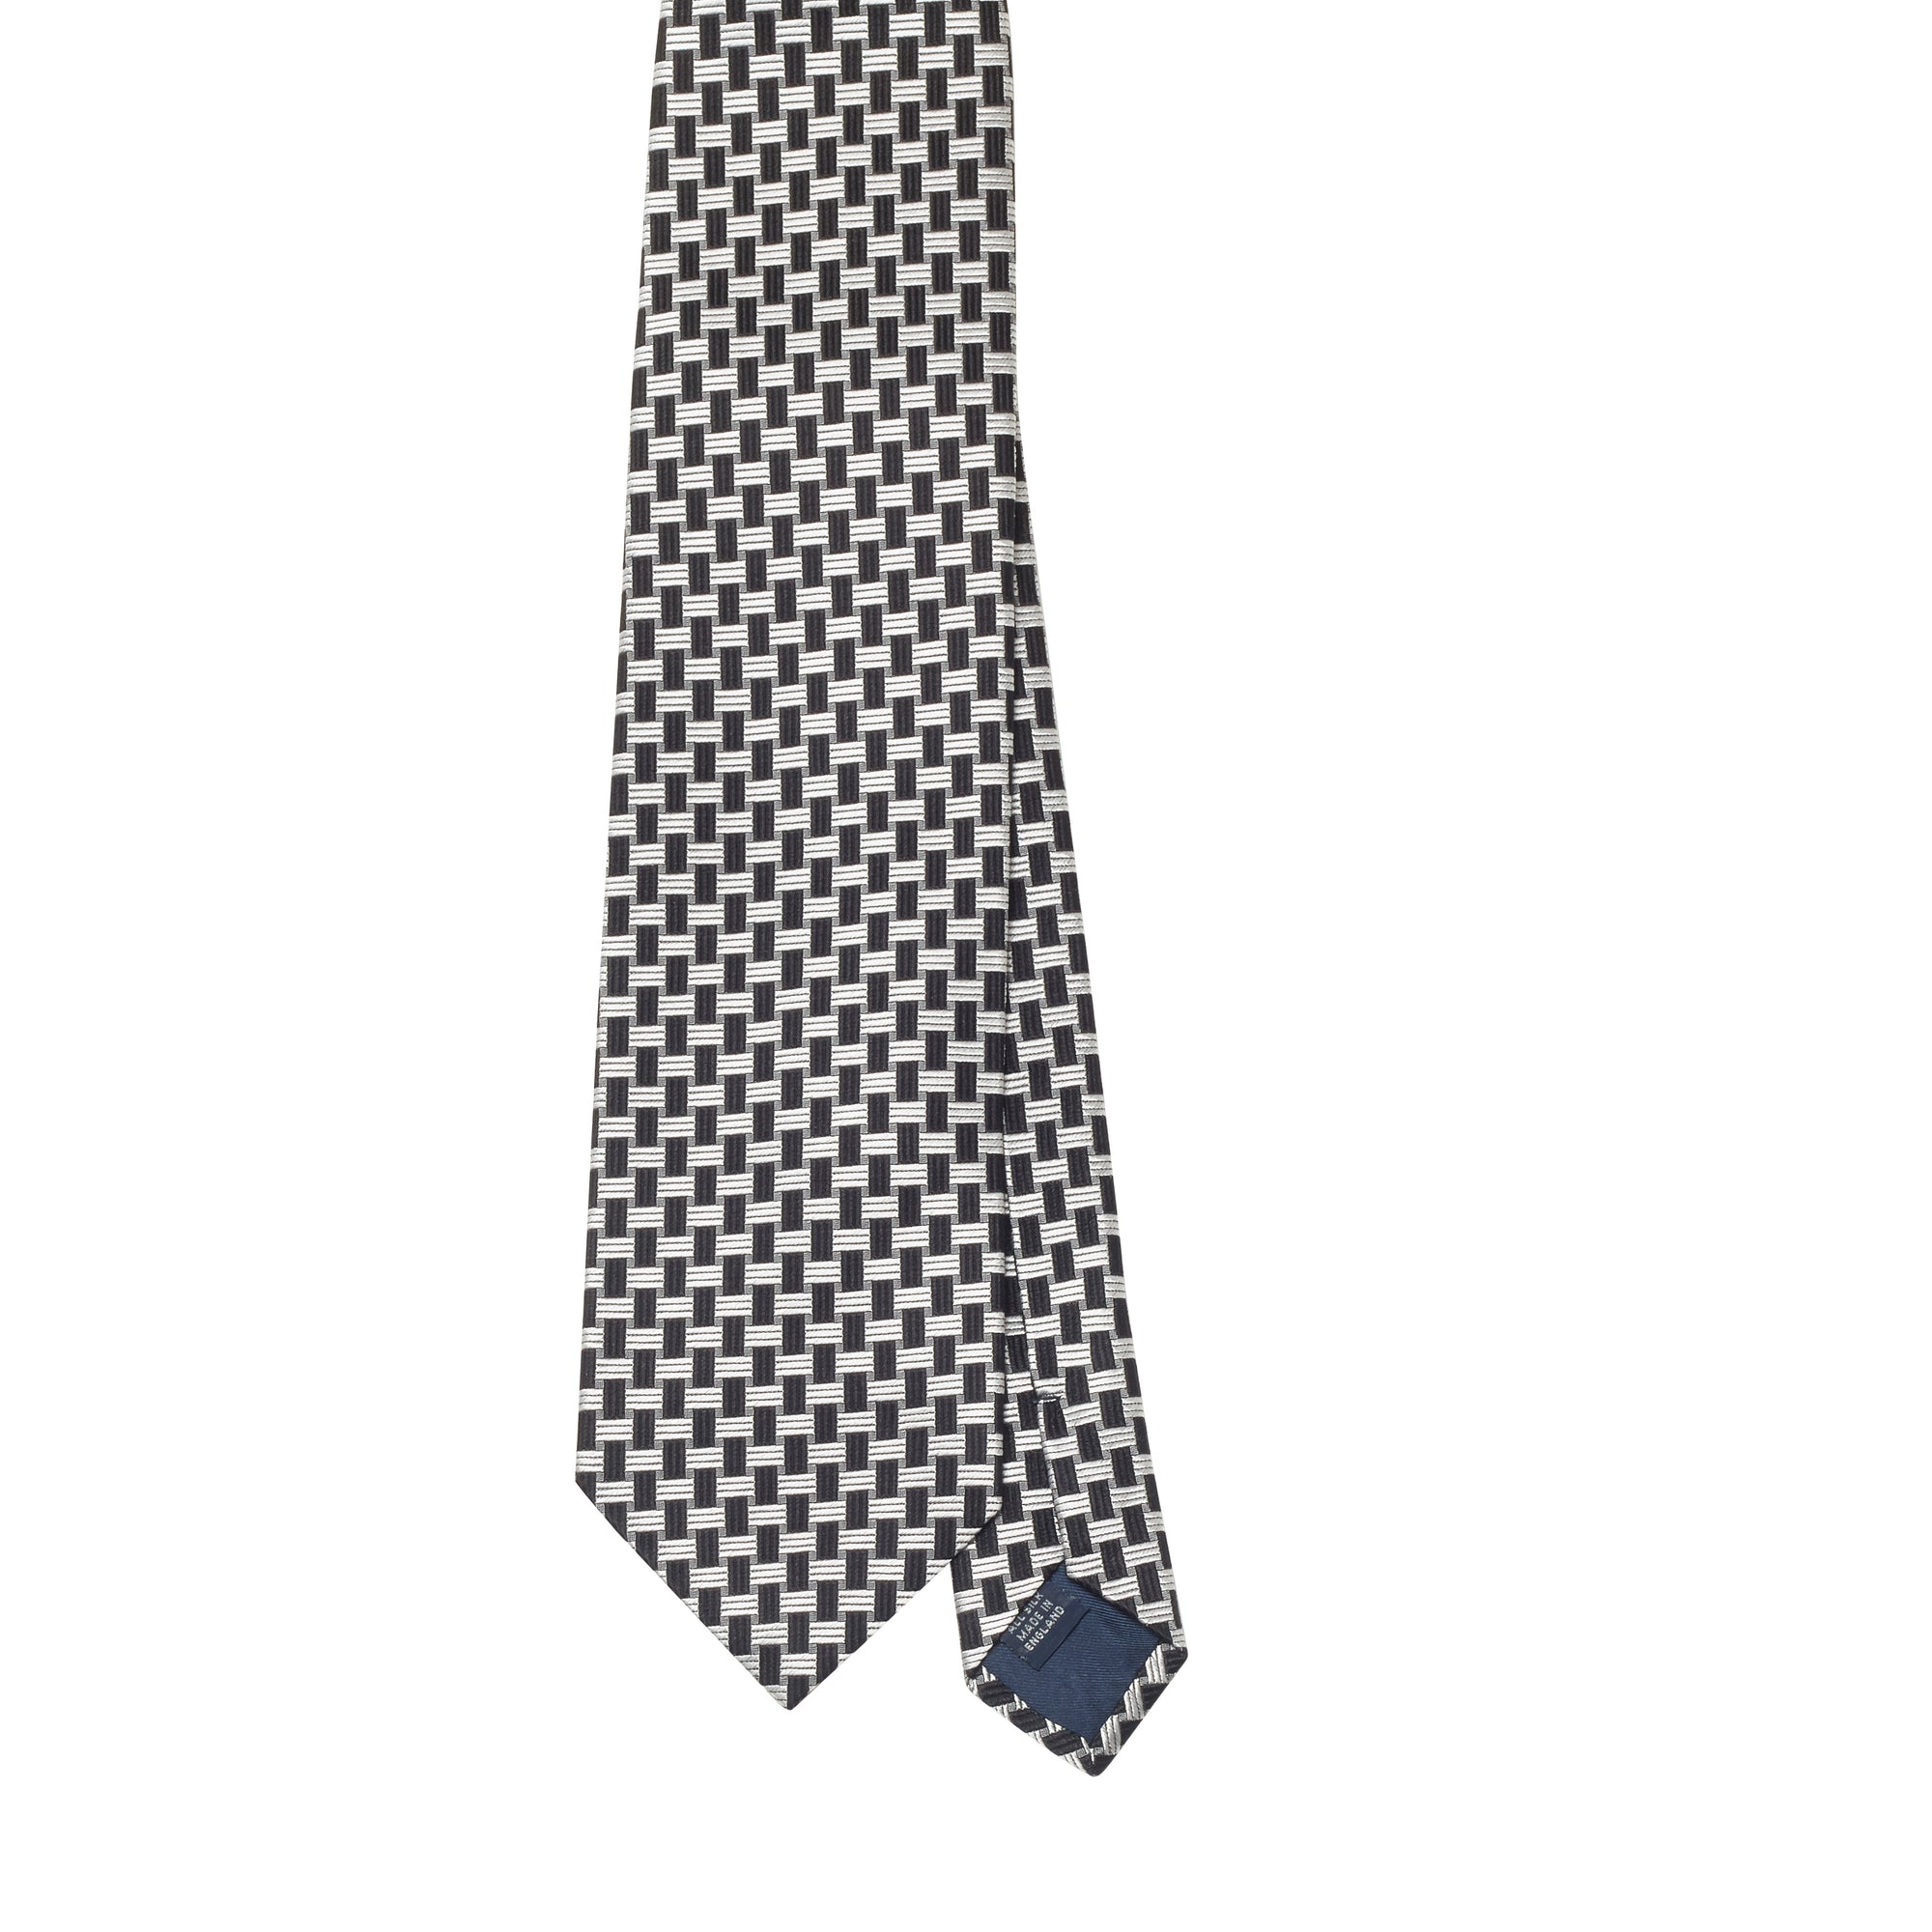 A high-quality, handmade black and white checkered Kirby Allison Sovereign Grade Basket Weave Silk Tie from KirbyAllison.com.